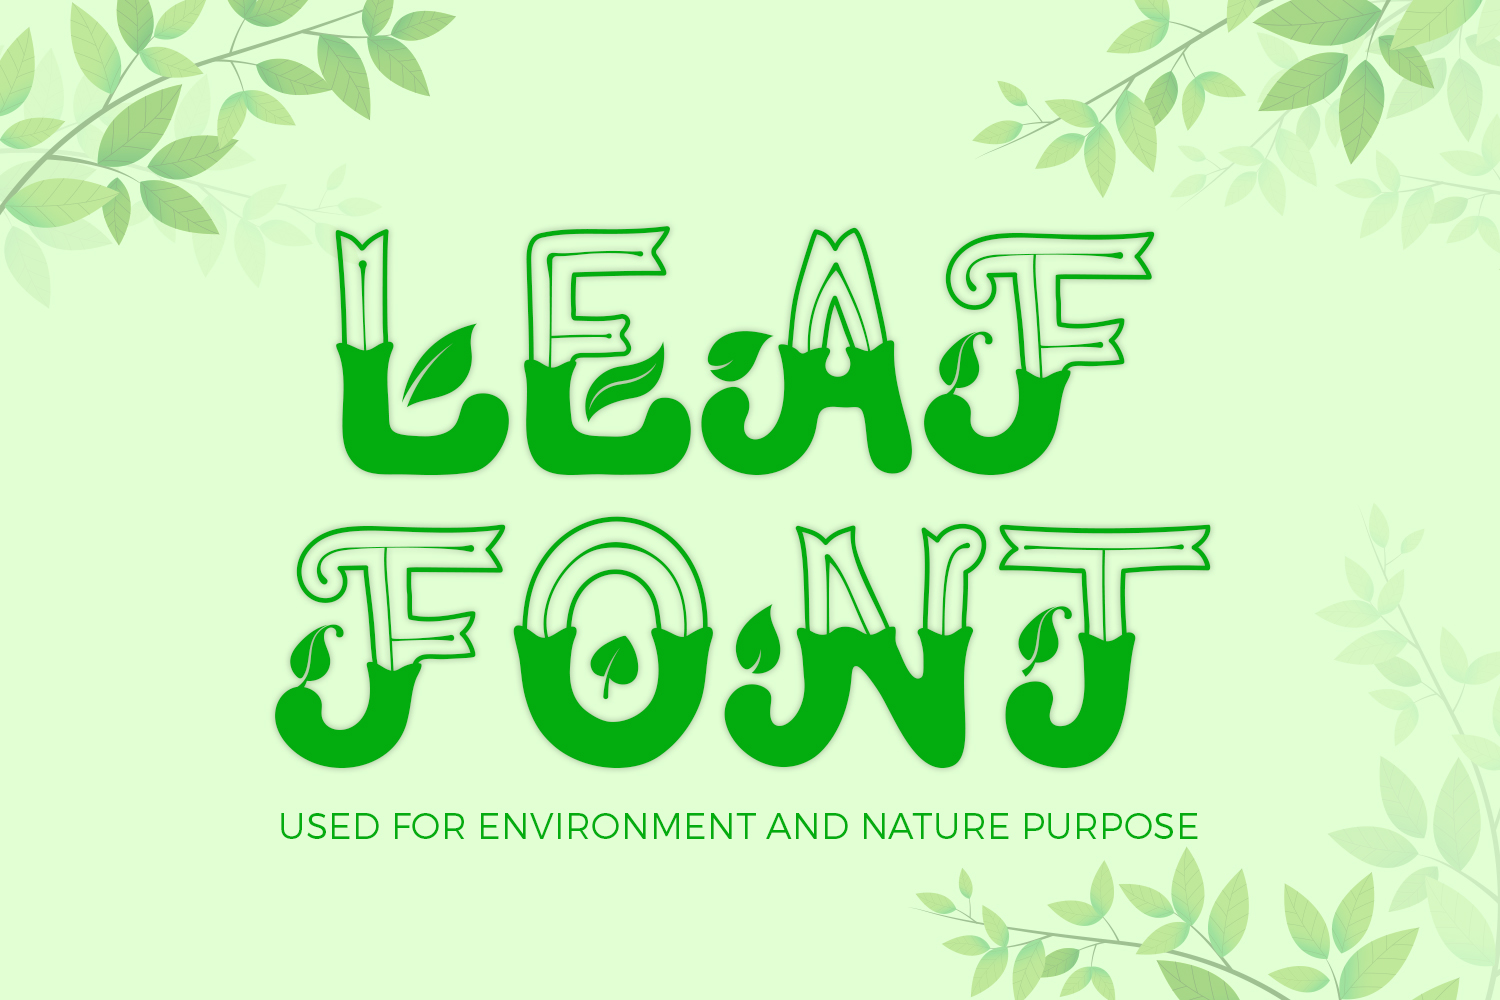 The Leafy Font Is a Nature Logo